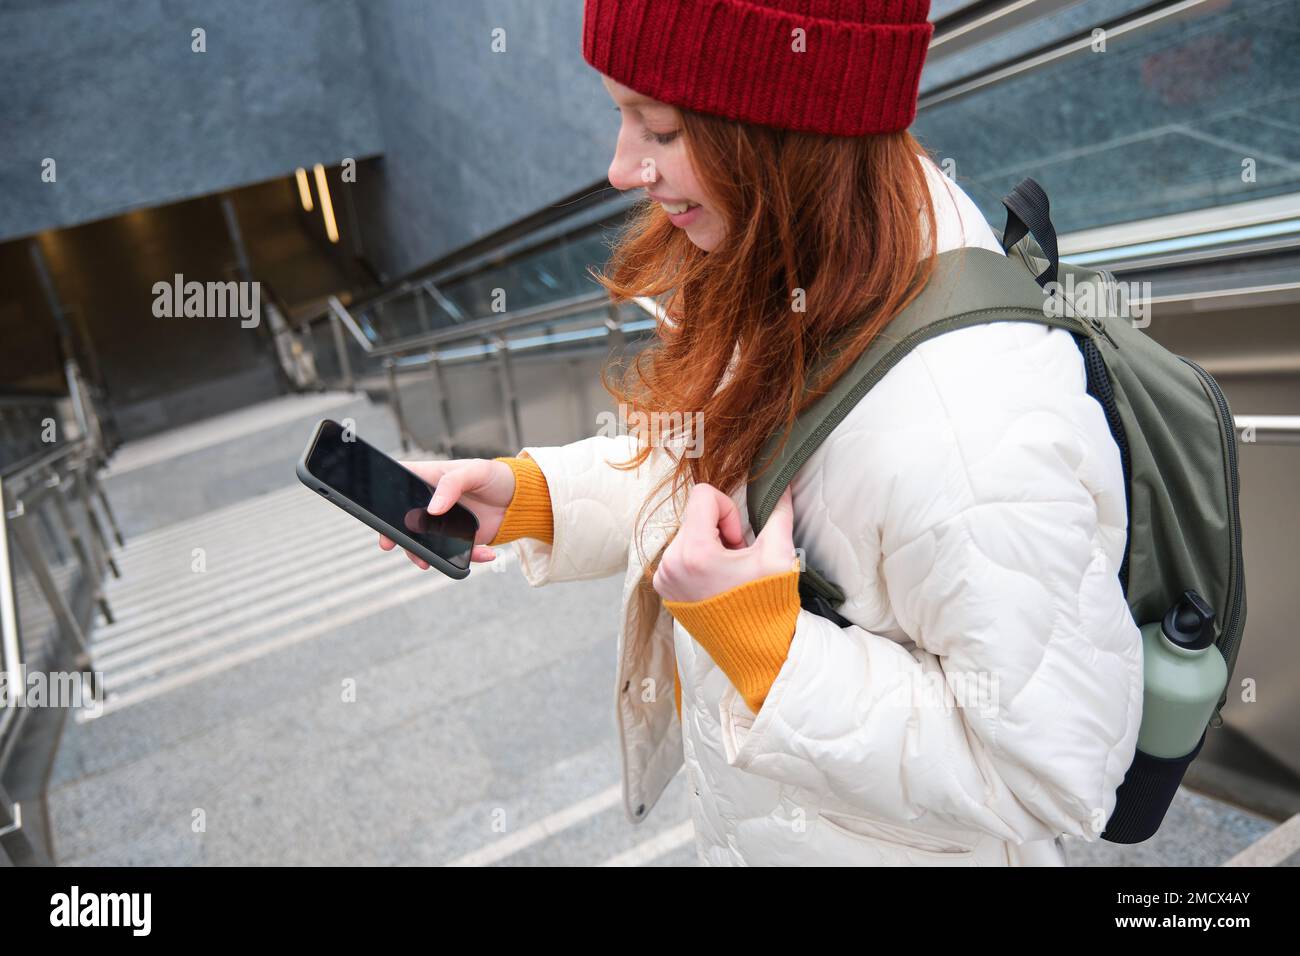 Smiling girl walking on stairs, using mobile phone, texting message on her way, using smartphone app map, follows route to destination place Stock Photo